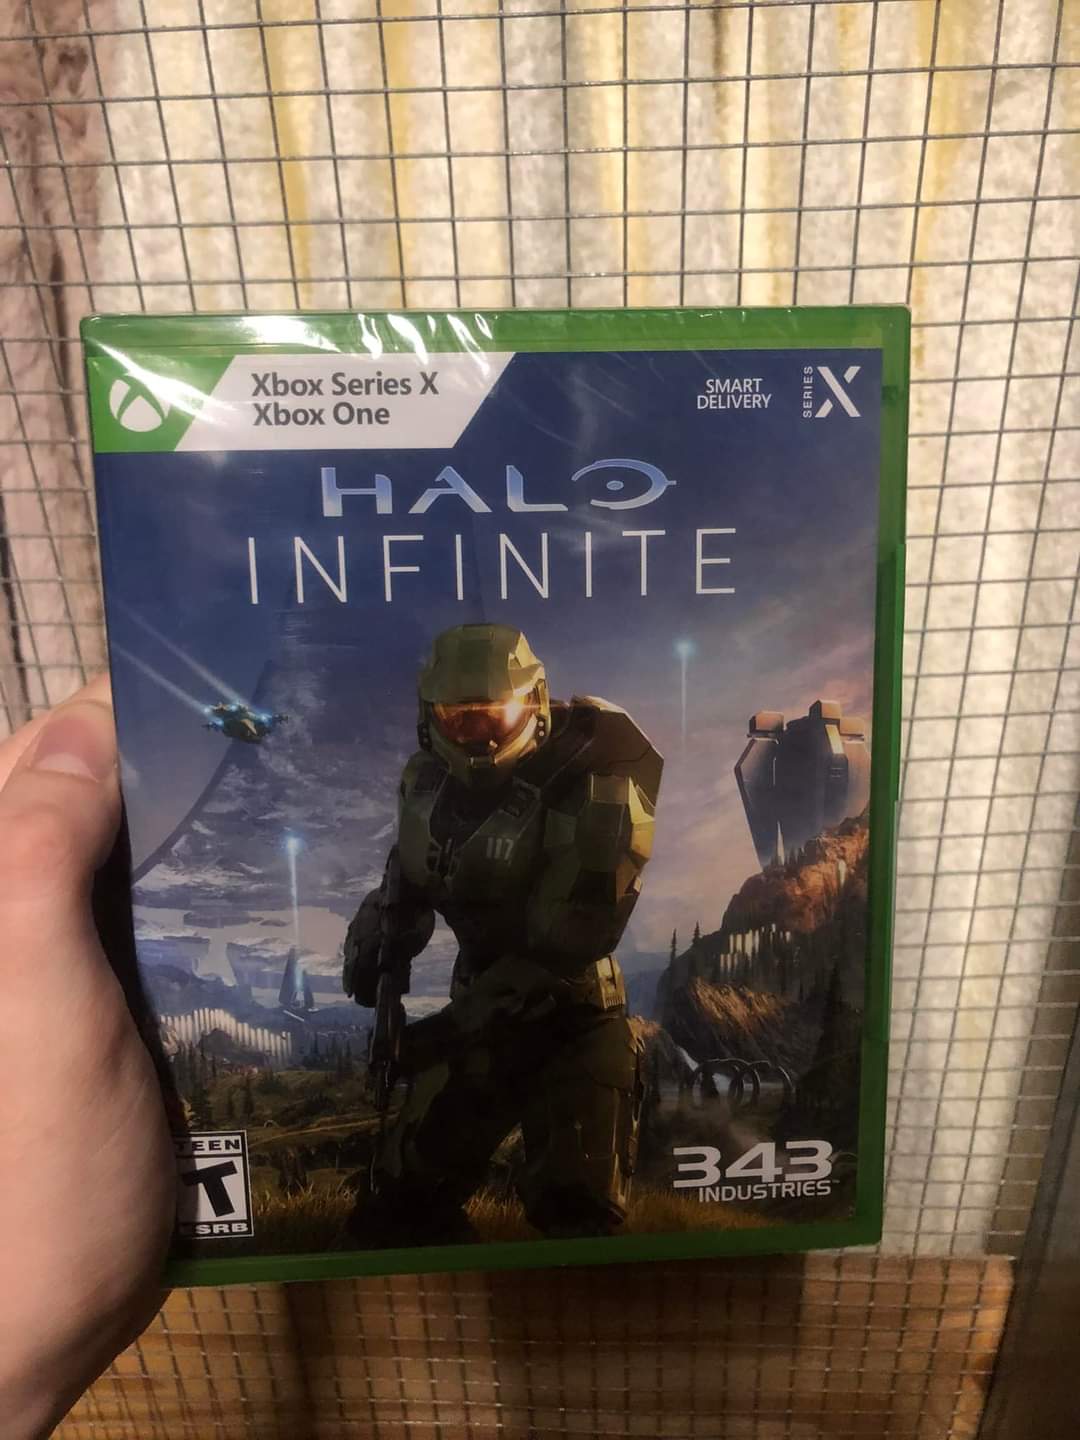 Halo Infinite Physical Copy Spotted Ahead of Release